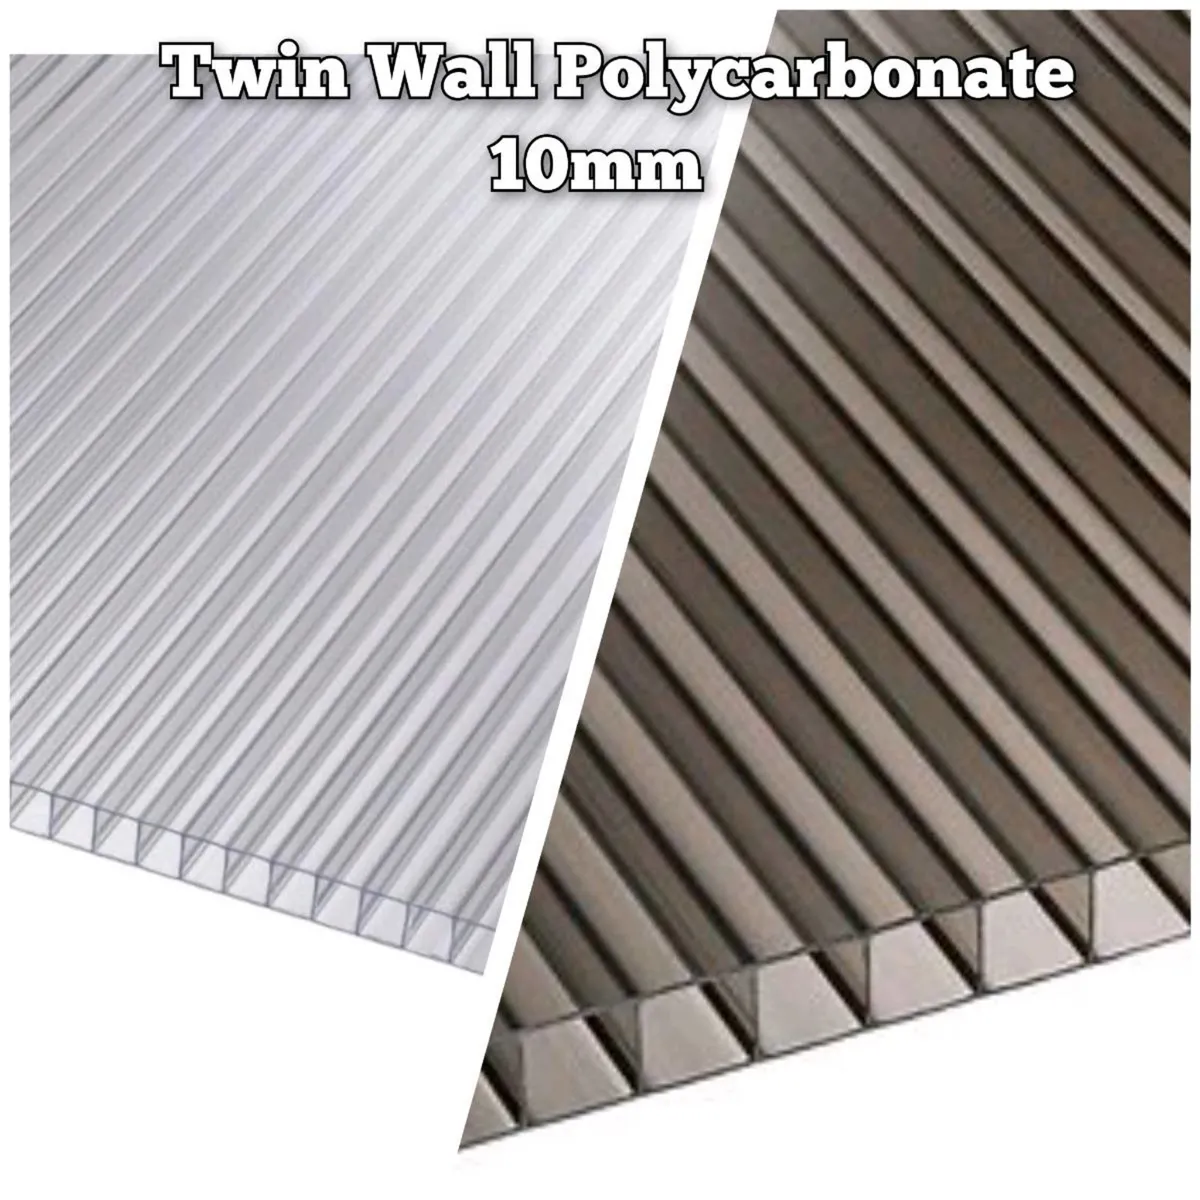 We are Supplying Polycarbonate Sheets